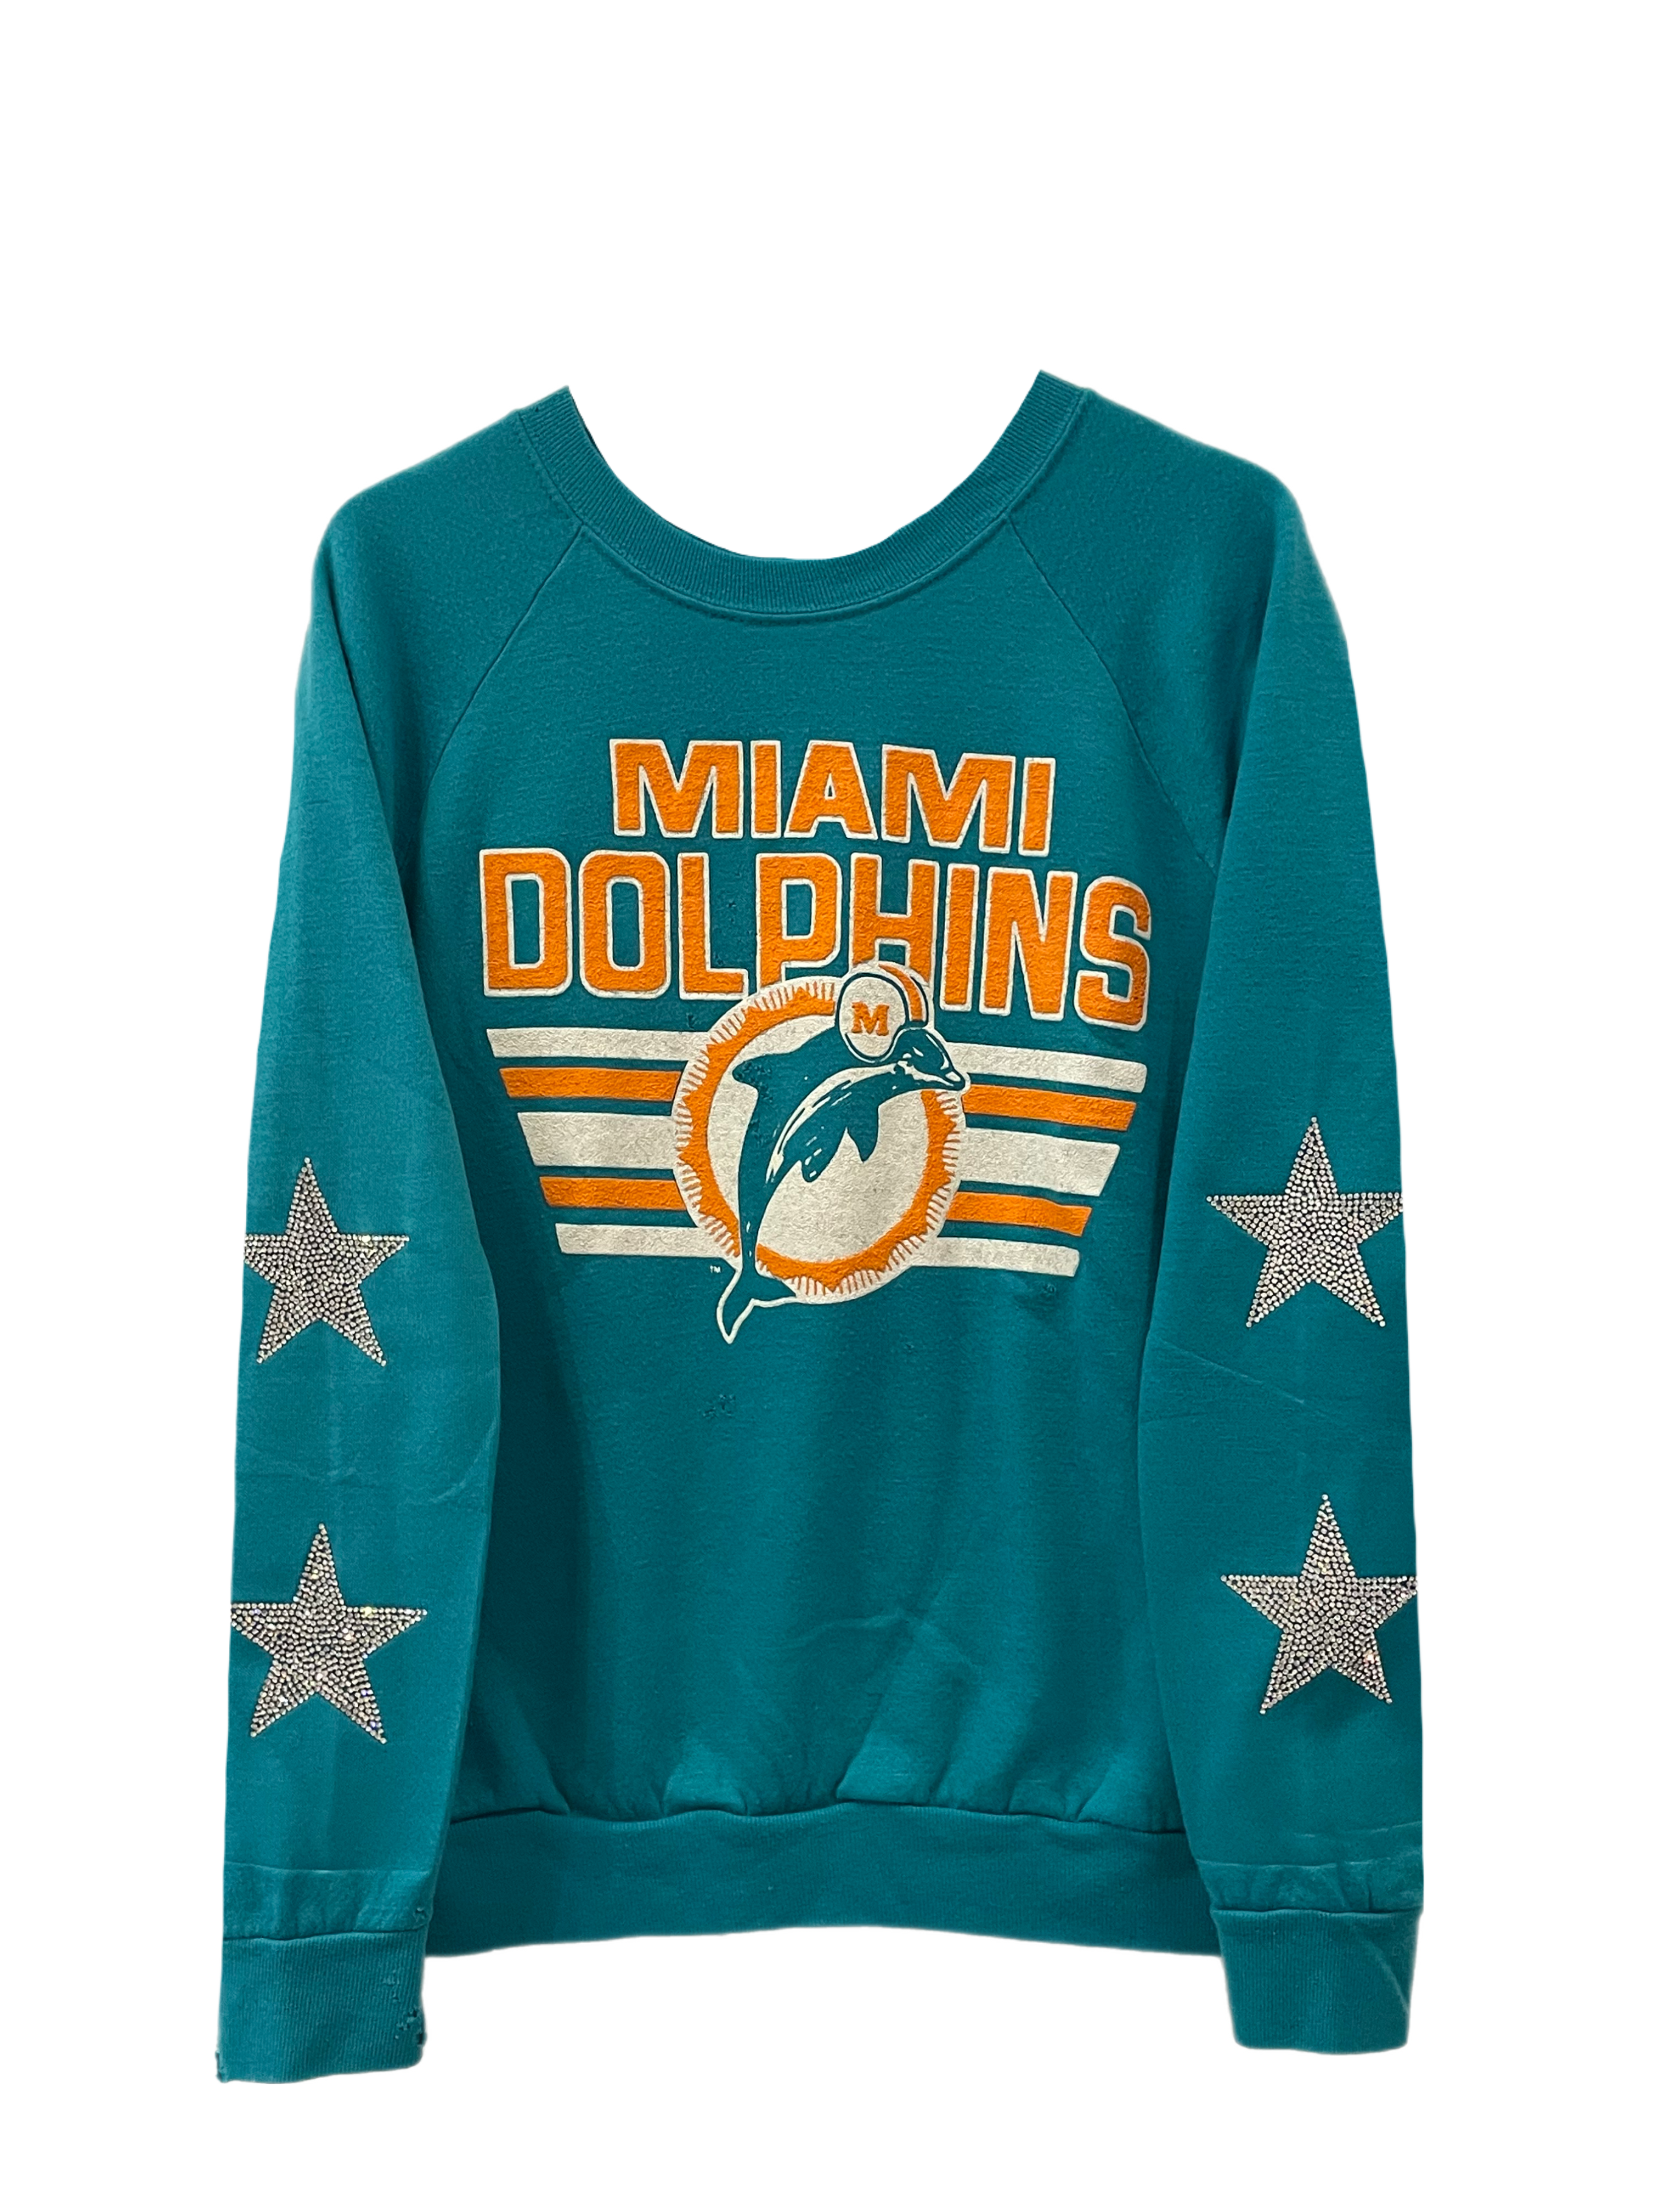 Miami Dolphins, NFL One of a KIND Vintage Sweatshirt with Crystal Star –  ShopCrystalRags